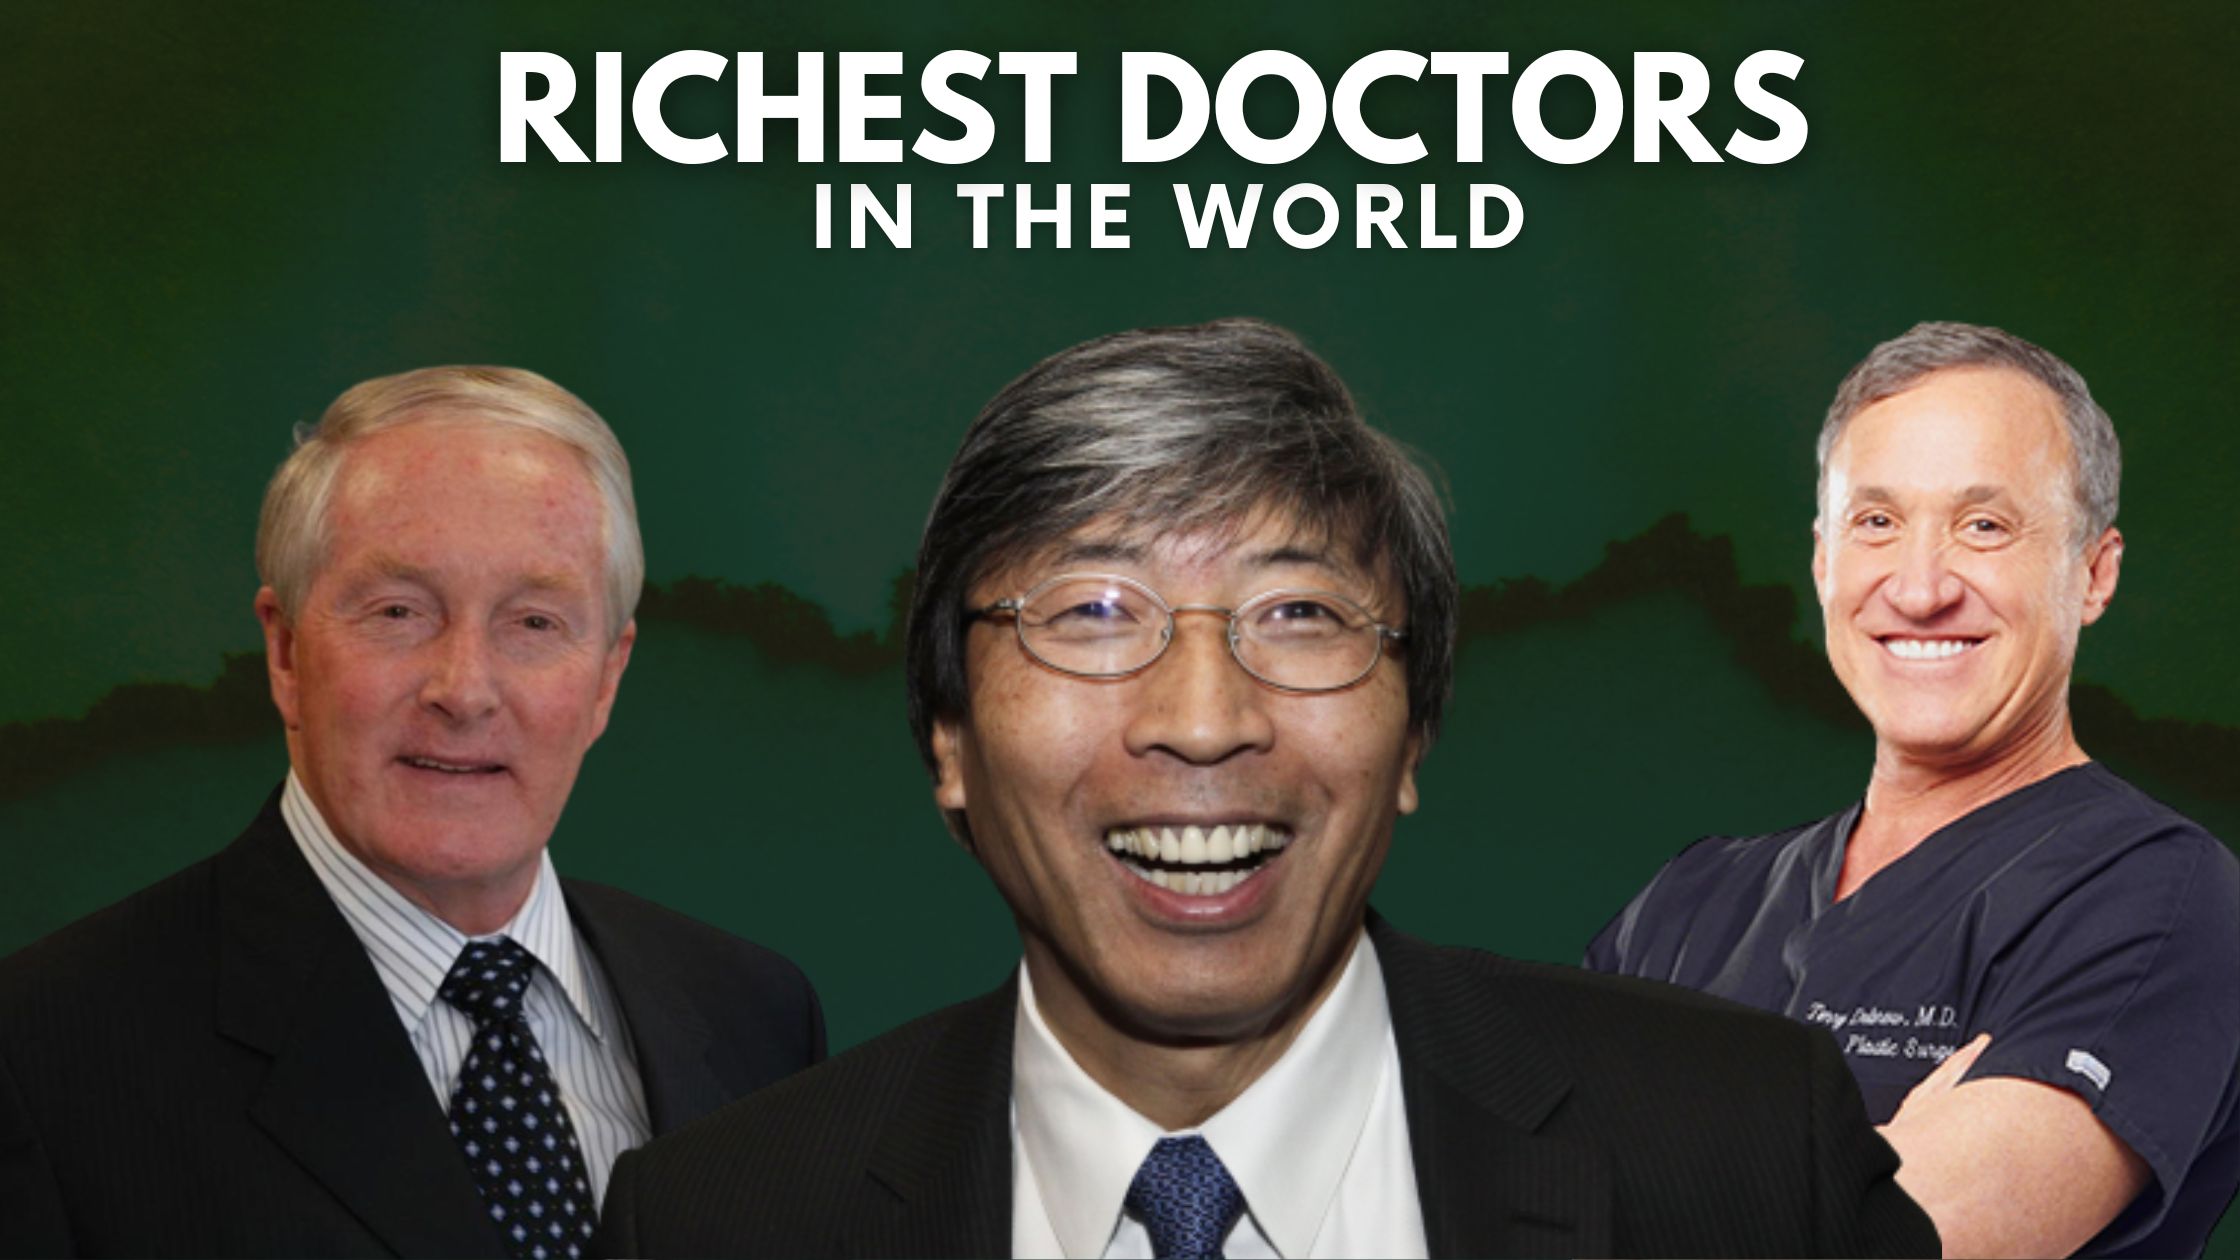 Top 10 Richest Doctors In The World